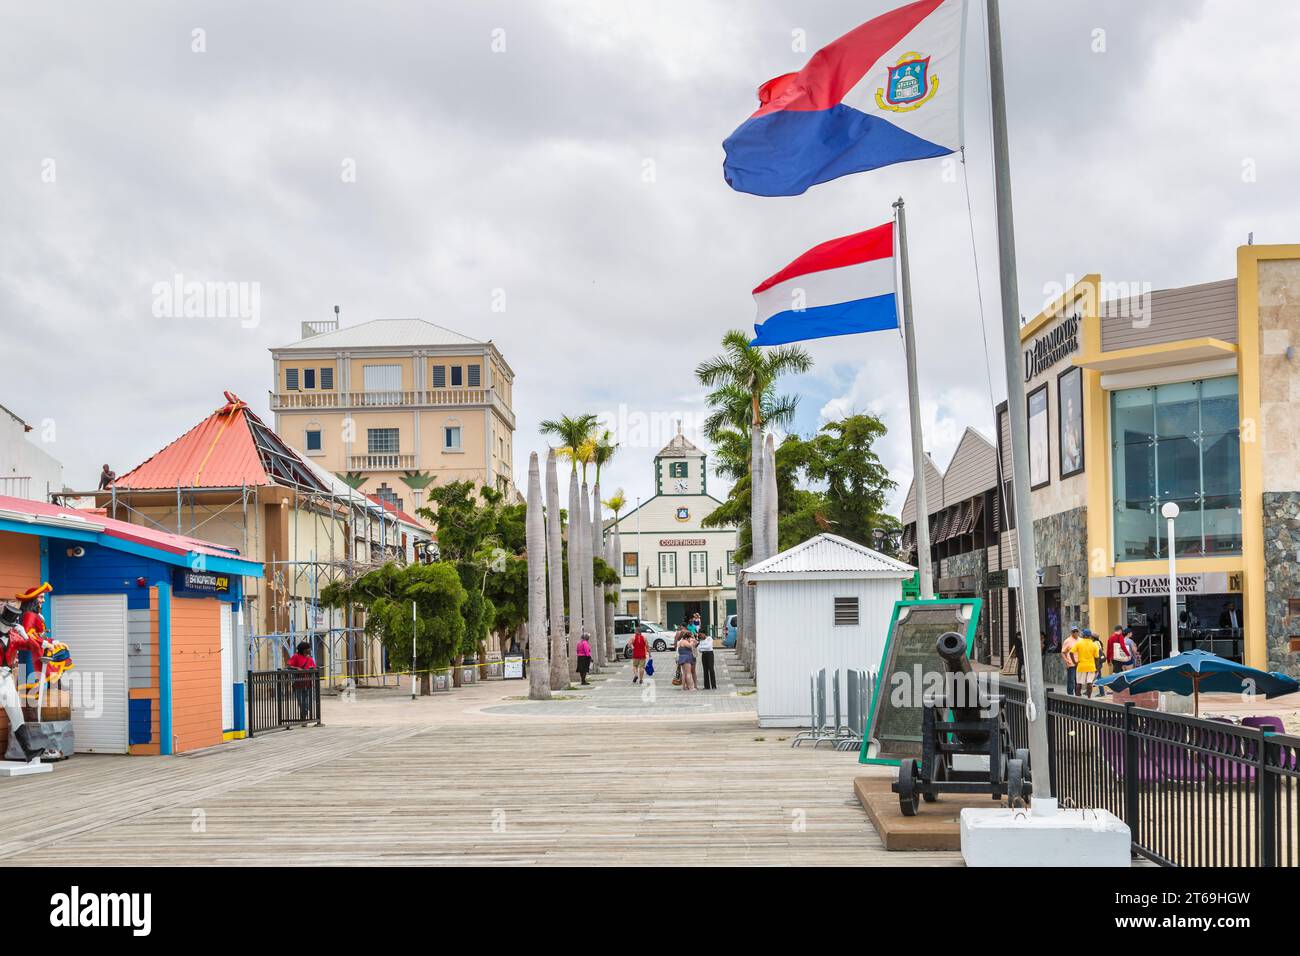 Tourists walking through tree lined Cyrus Wathey Square toward the courthouse in Philipsburg, Sint Maarten in the Caribbean Sea Stock Photo